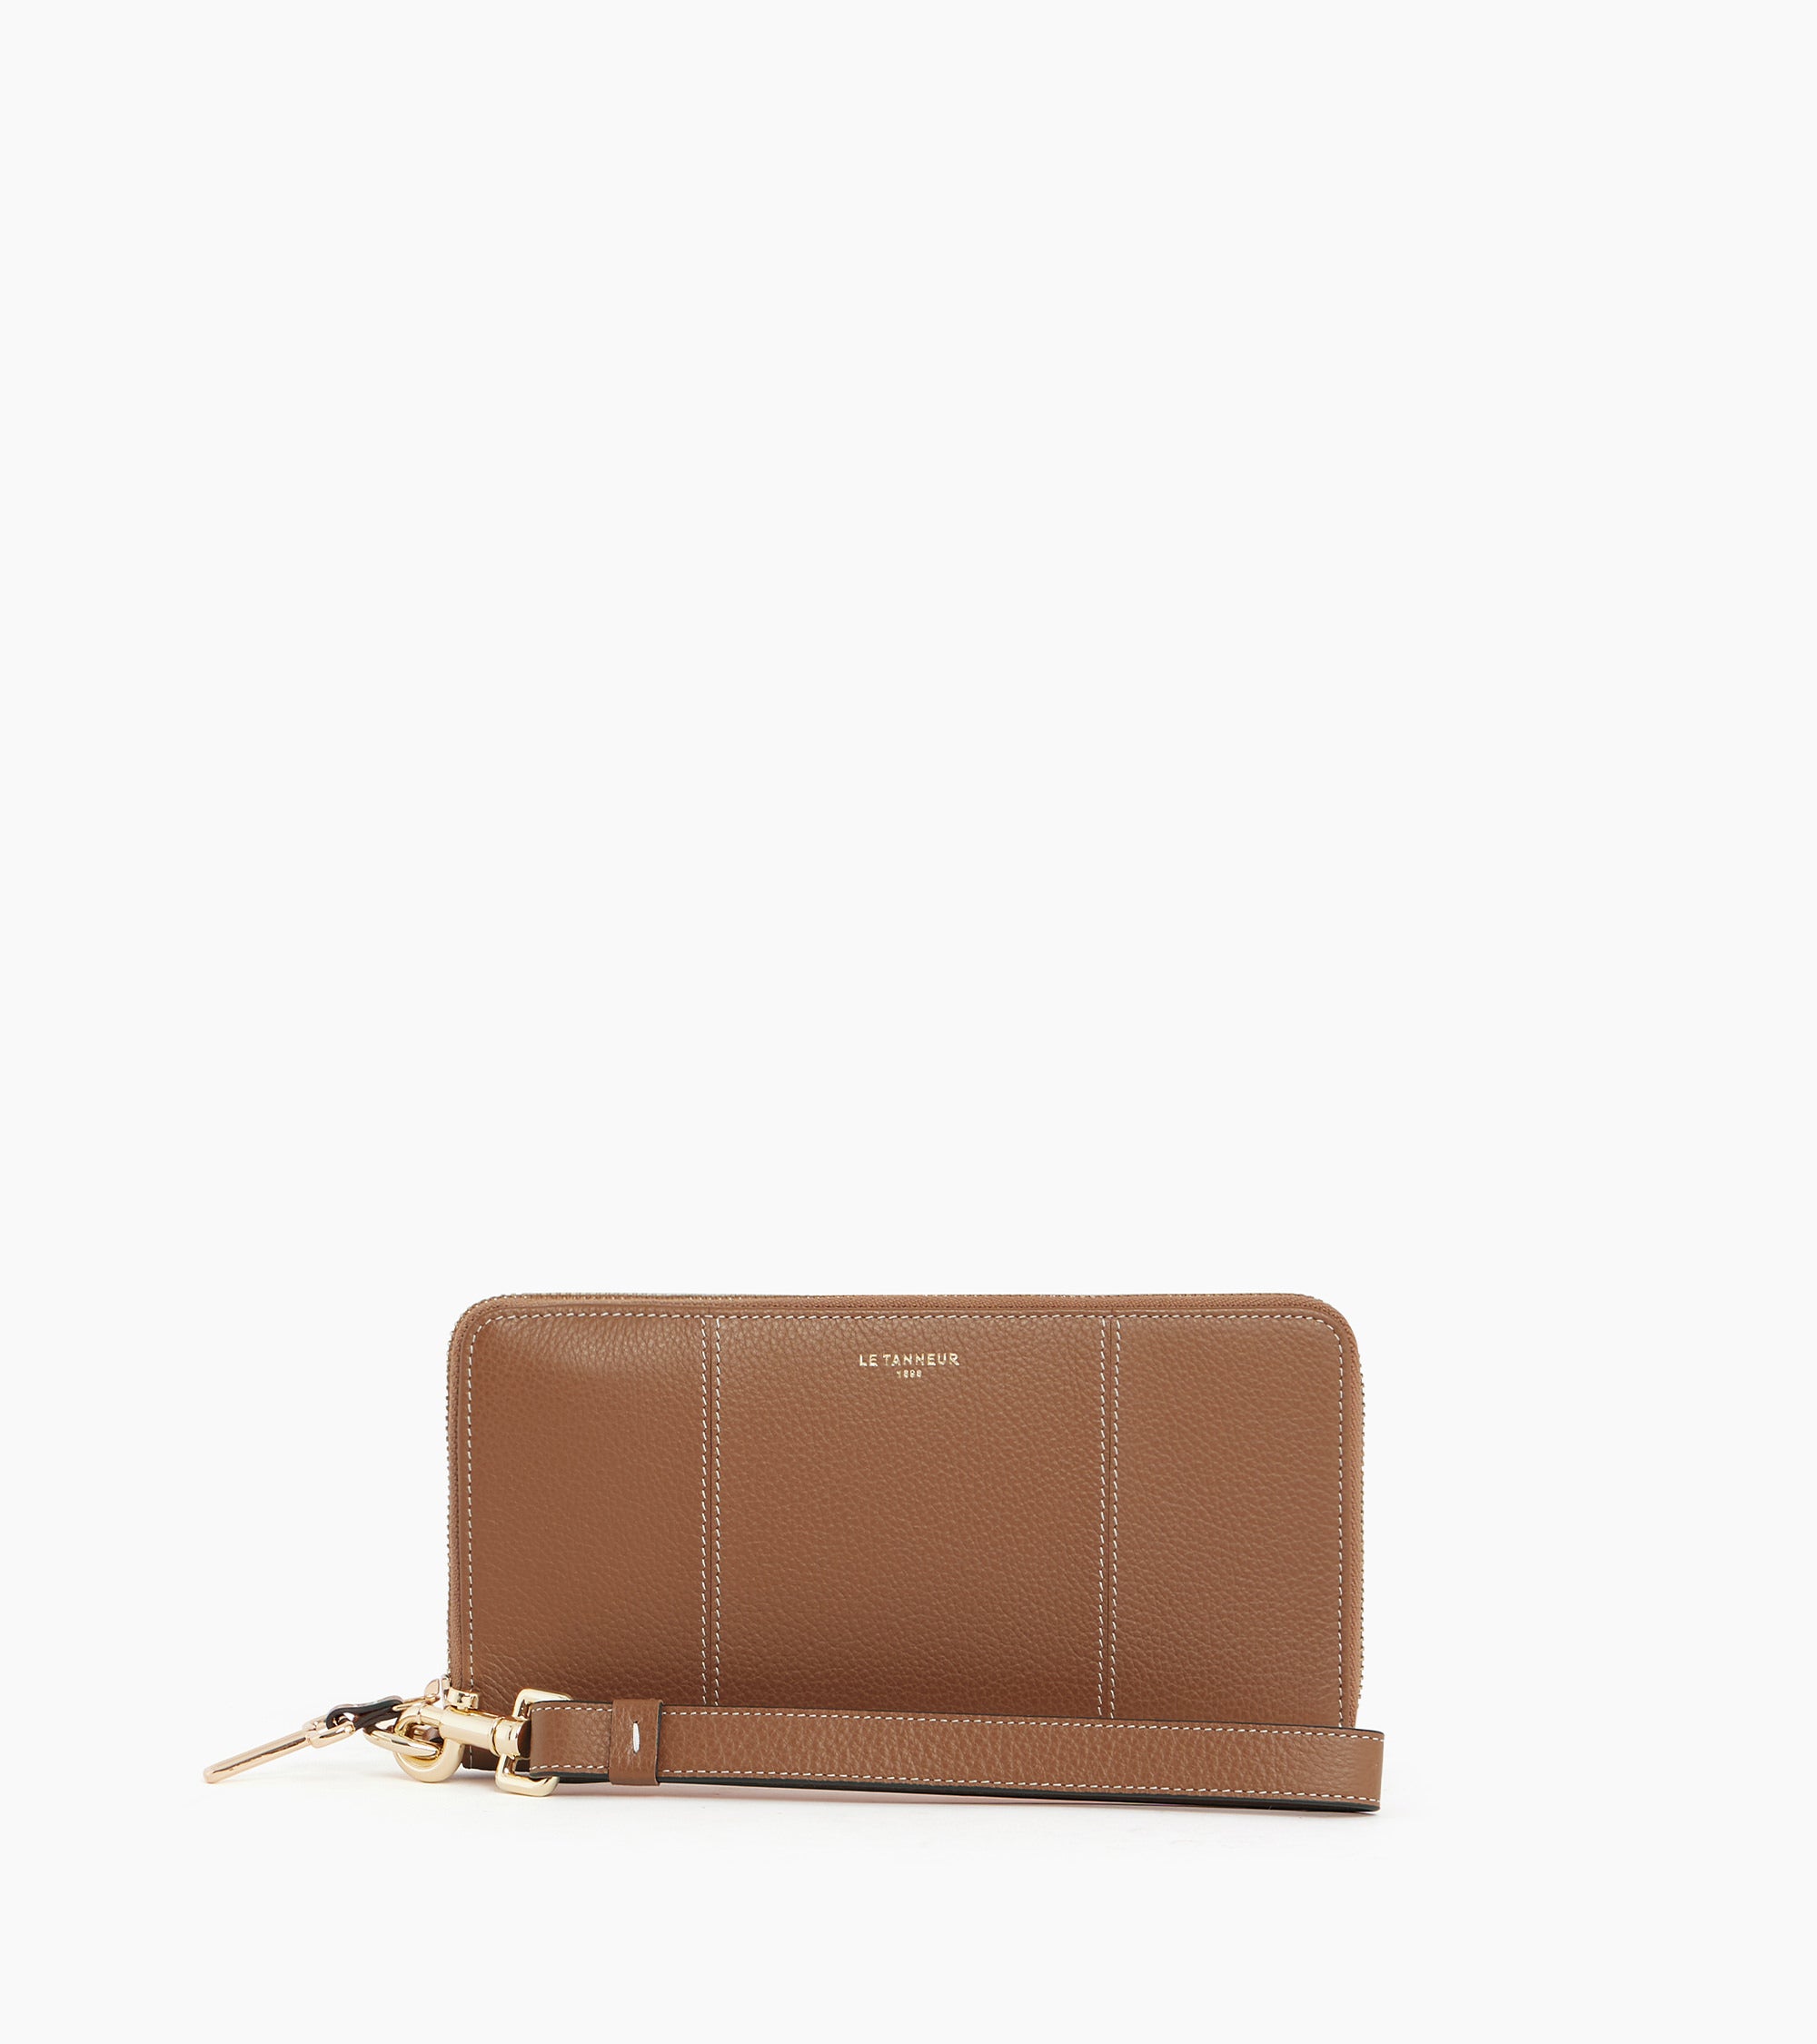 Juliette zipped travel companion in pebbled leather